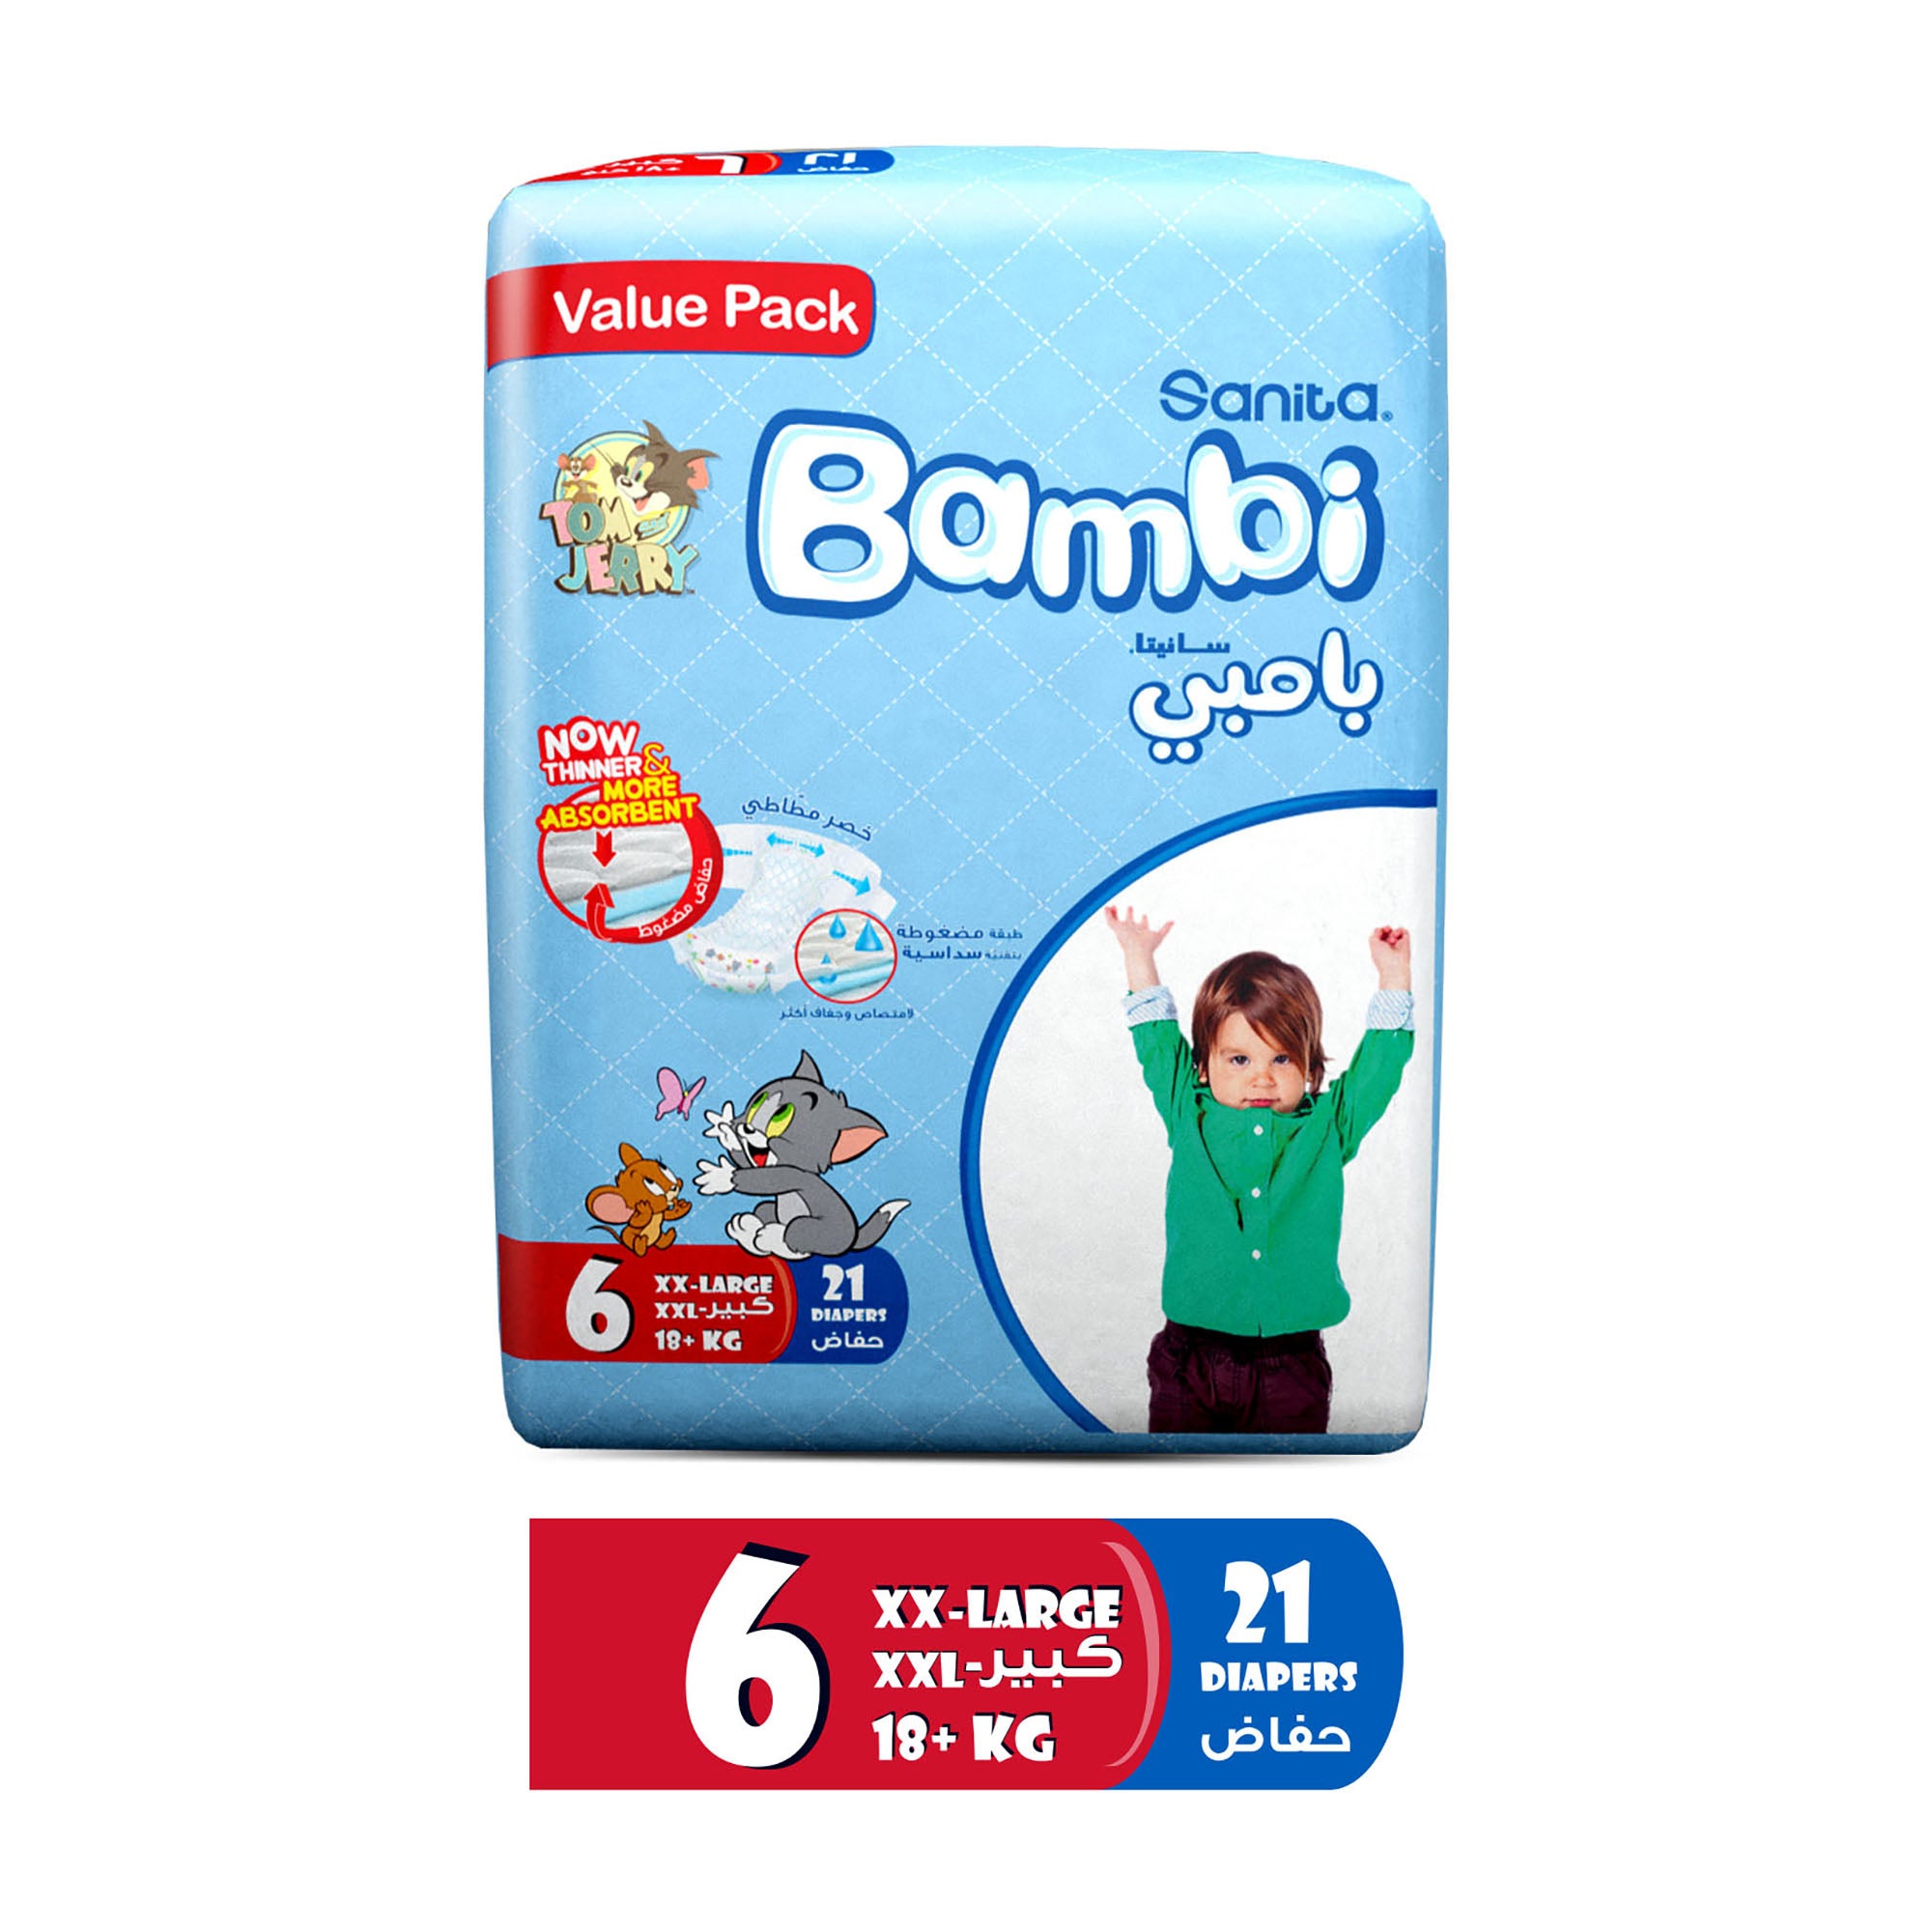 Bambi Baby Diapers Value Pack Size 6, XX-Large, +18 kg - 21's